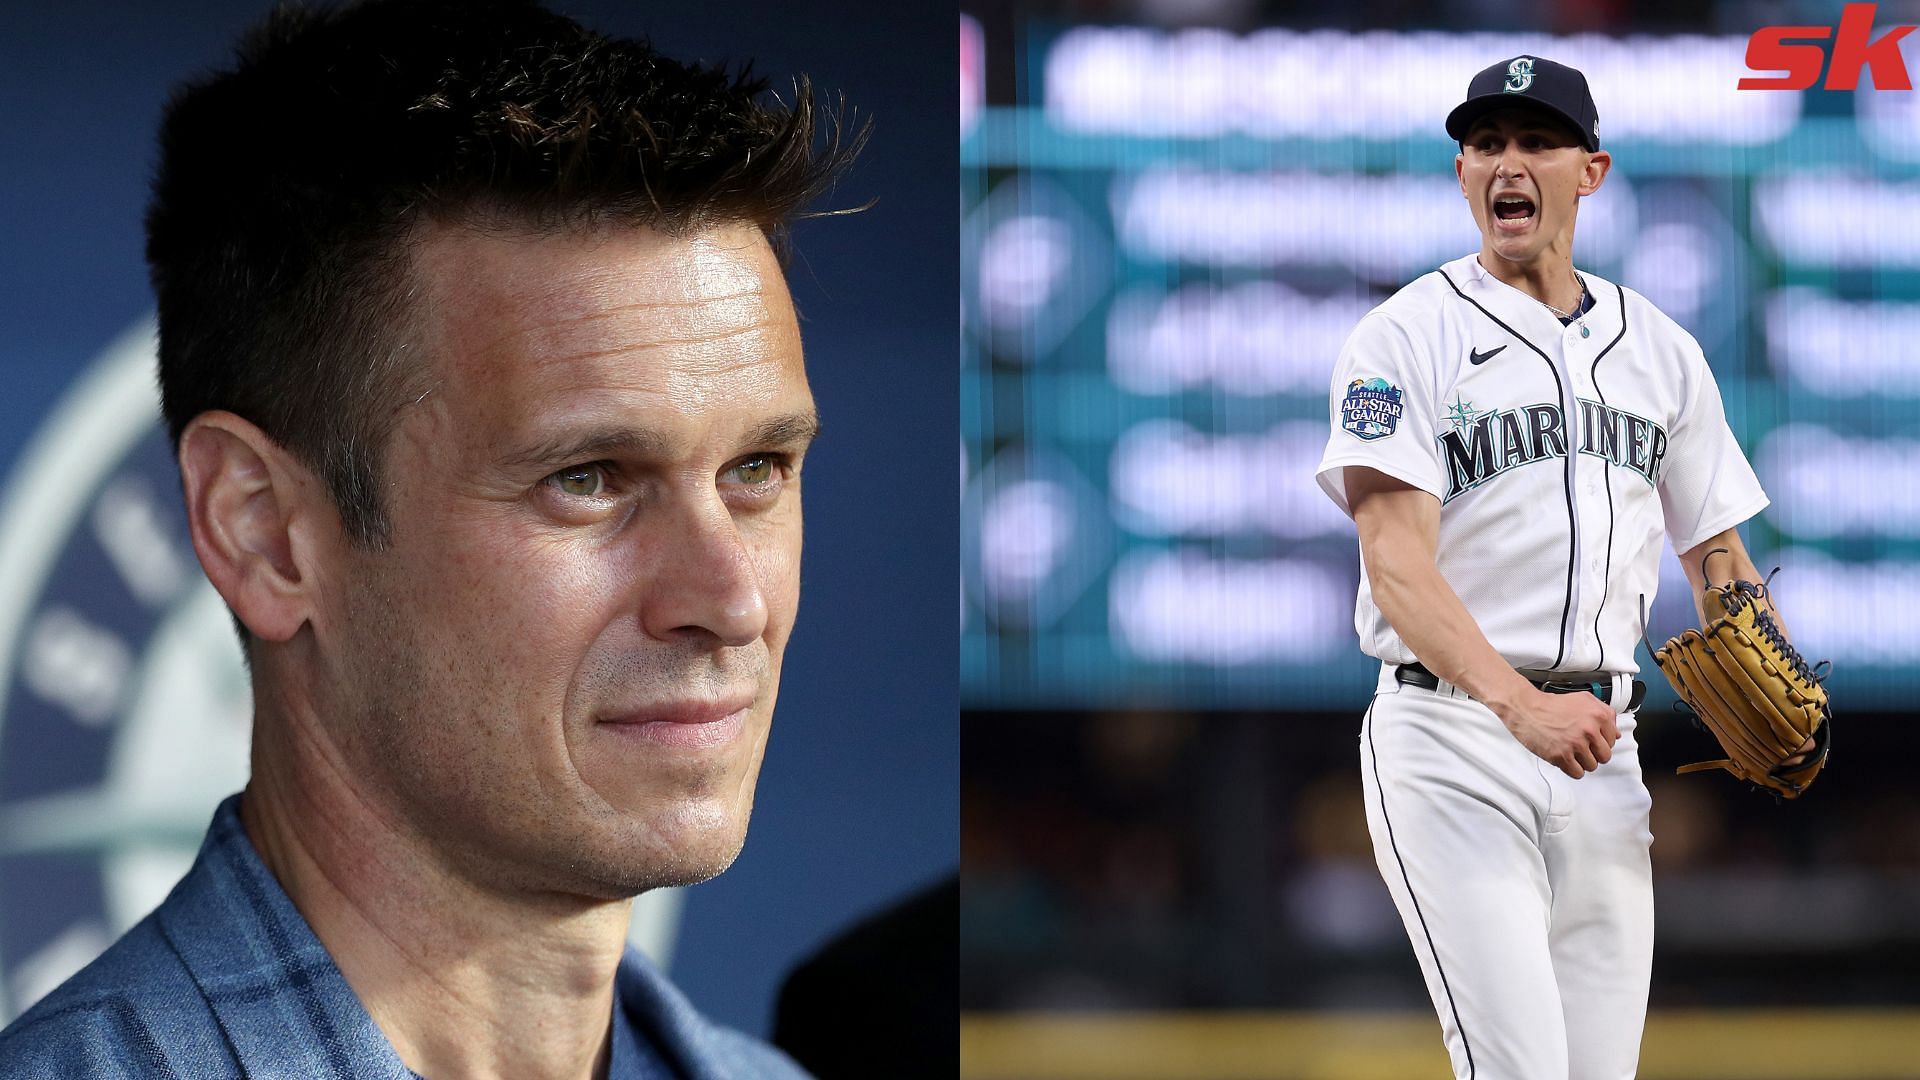 Mariners president Jerry Dipoto defends George Kirby